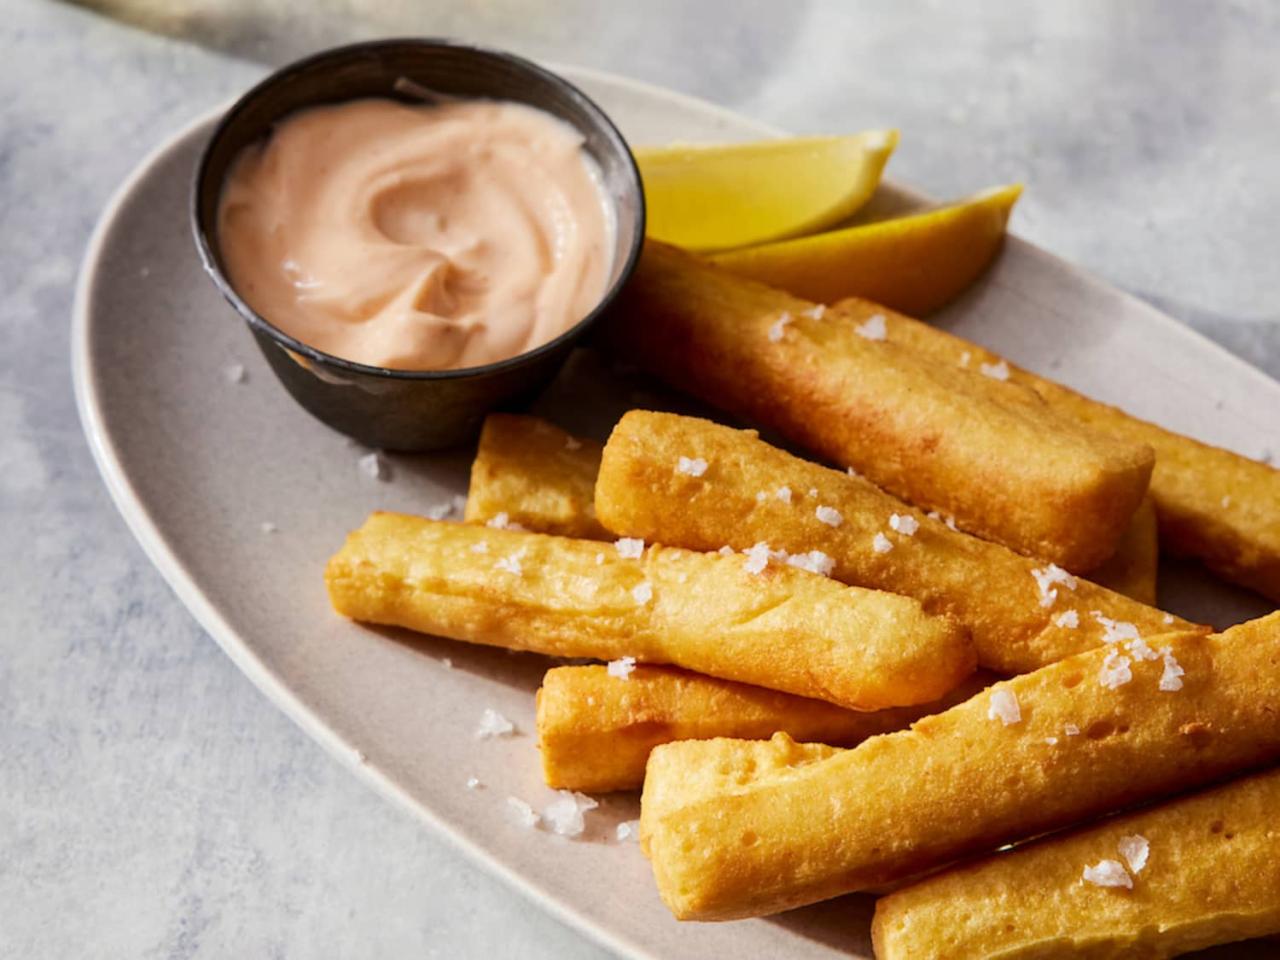 Panisse Recipe (Chickpea Fries) | The Kitchn